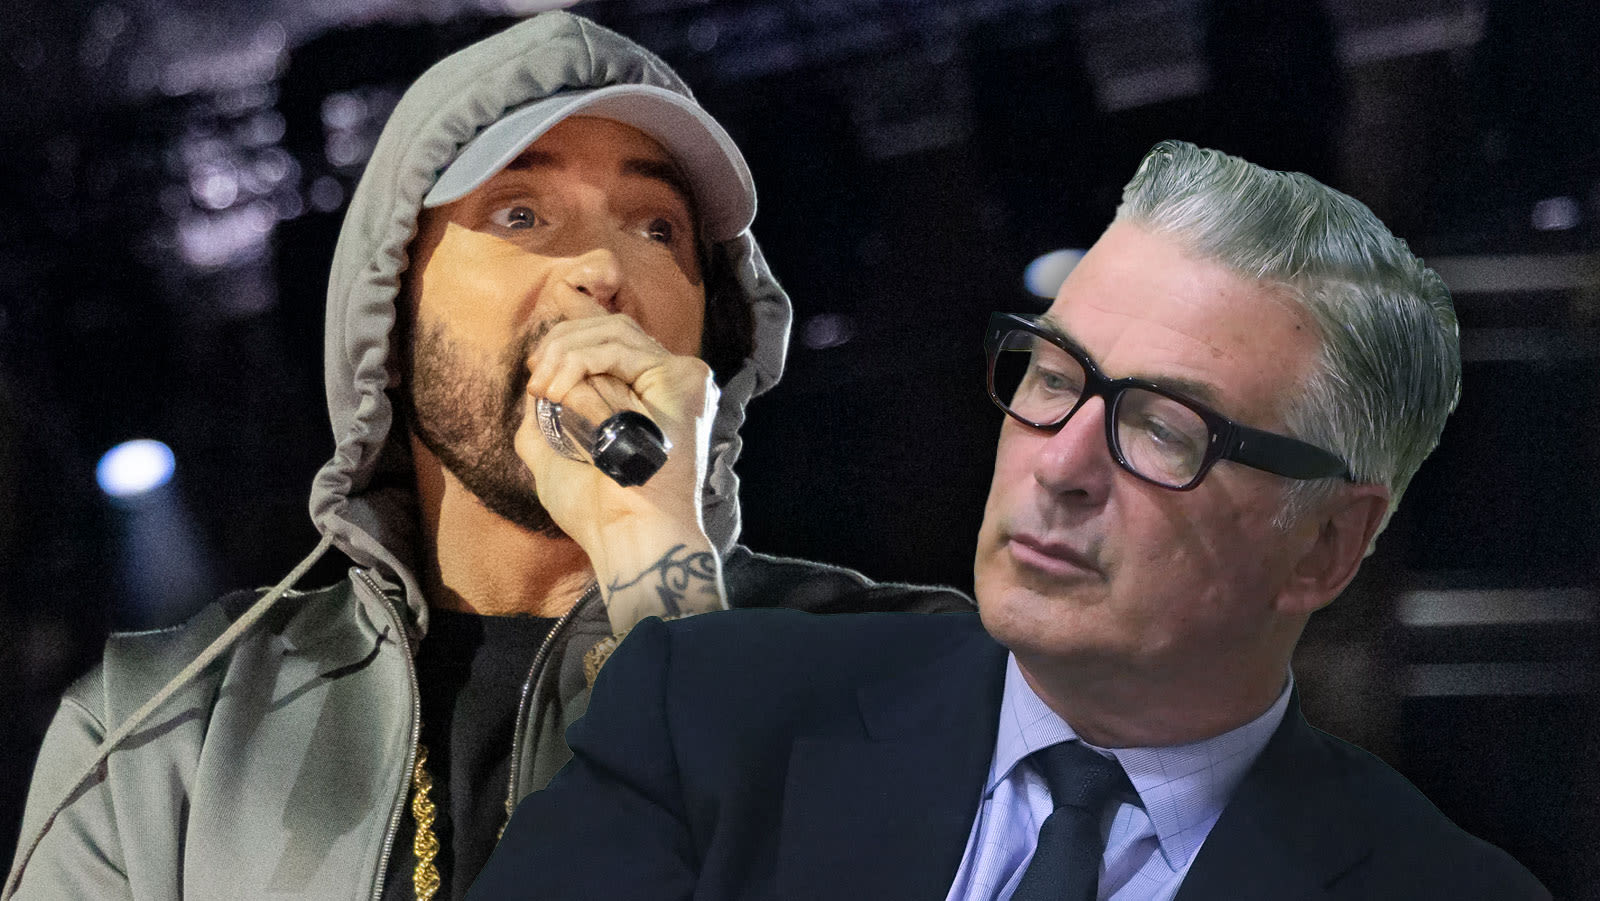 Eminem Makes Reference To Alec Baldwin’s ‘Rust’ Shooting: “F*** Around And Get Popped Like Halyna Hutchins”